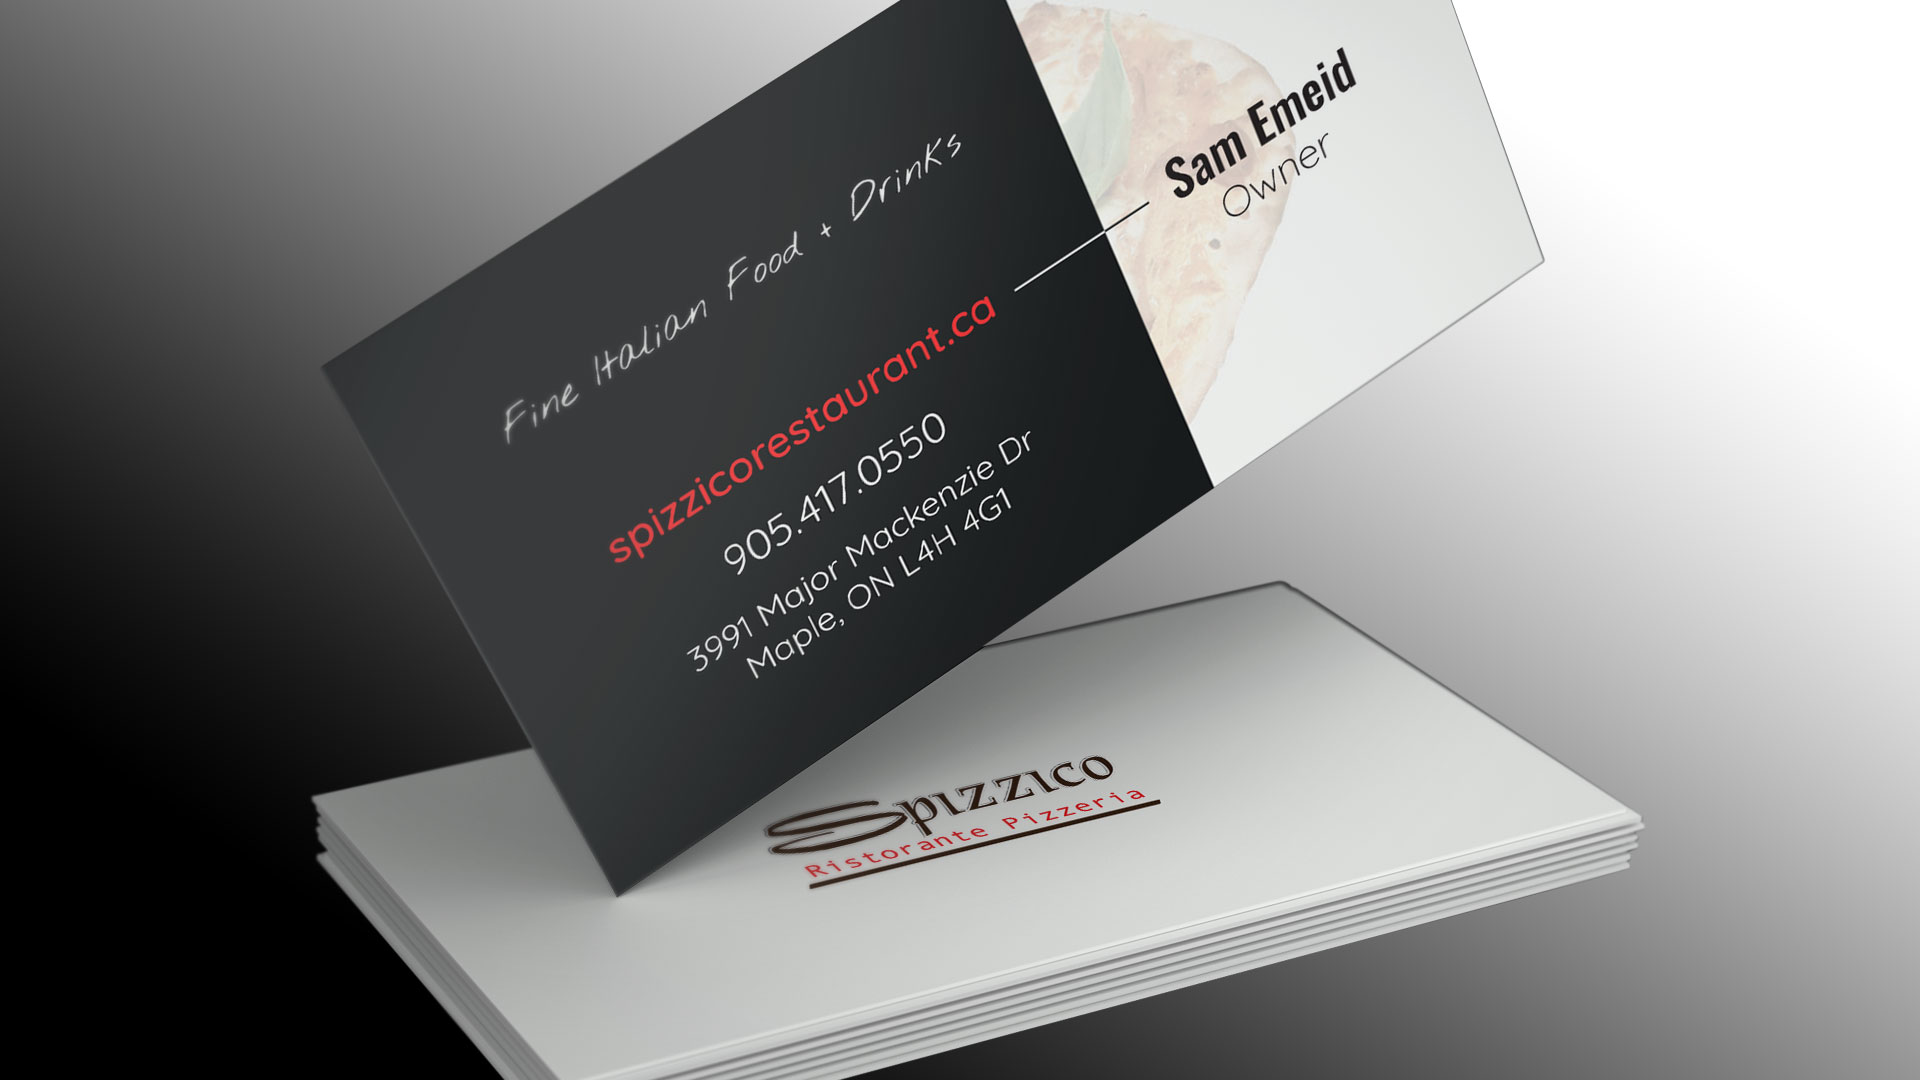 The image from PixelUp unveils the bespoke business card design tailored for Spizzico Restaurant, presenting both its front and back sides. The front of the card is displayed atop a stack, revealing the back of the card beneath.